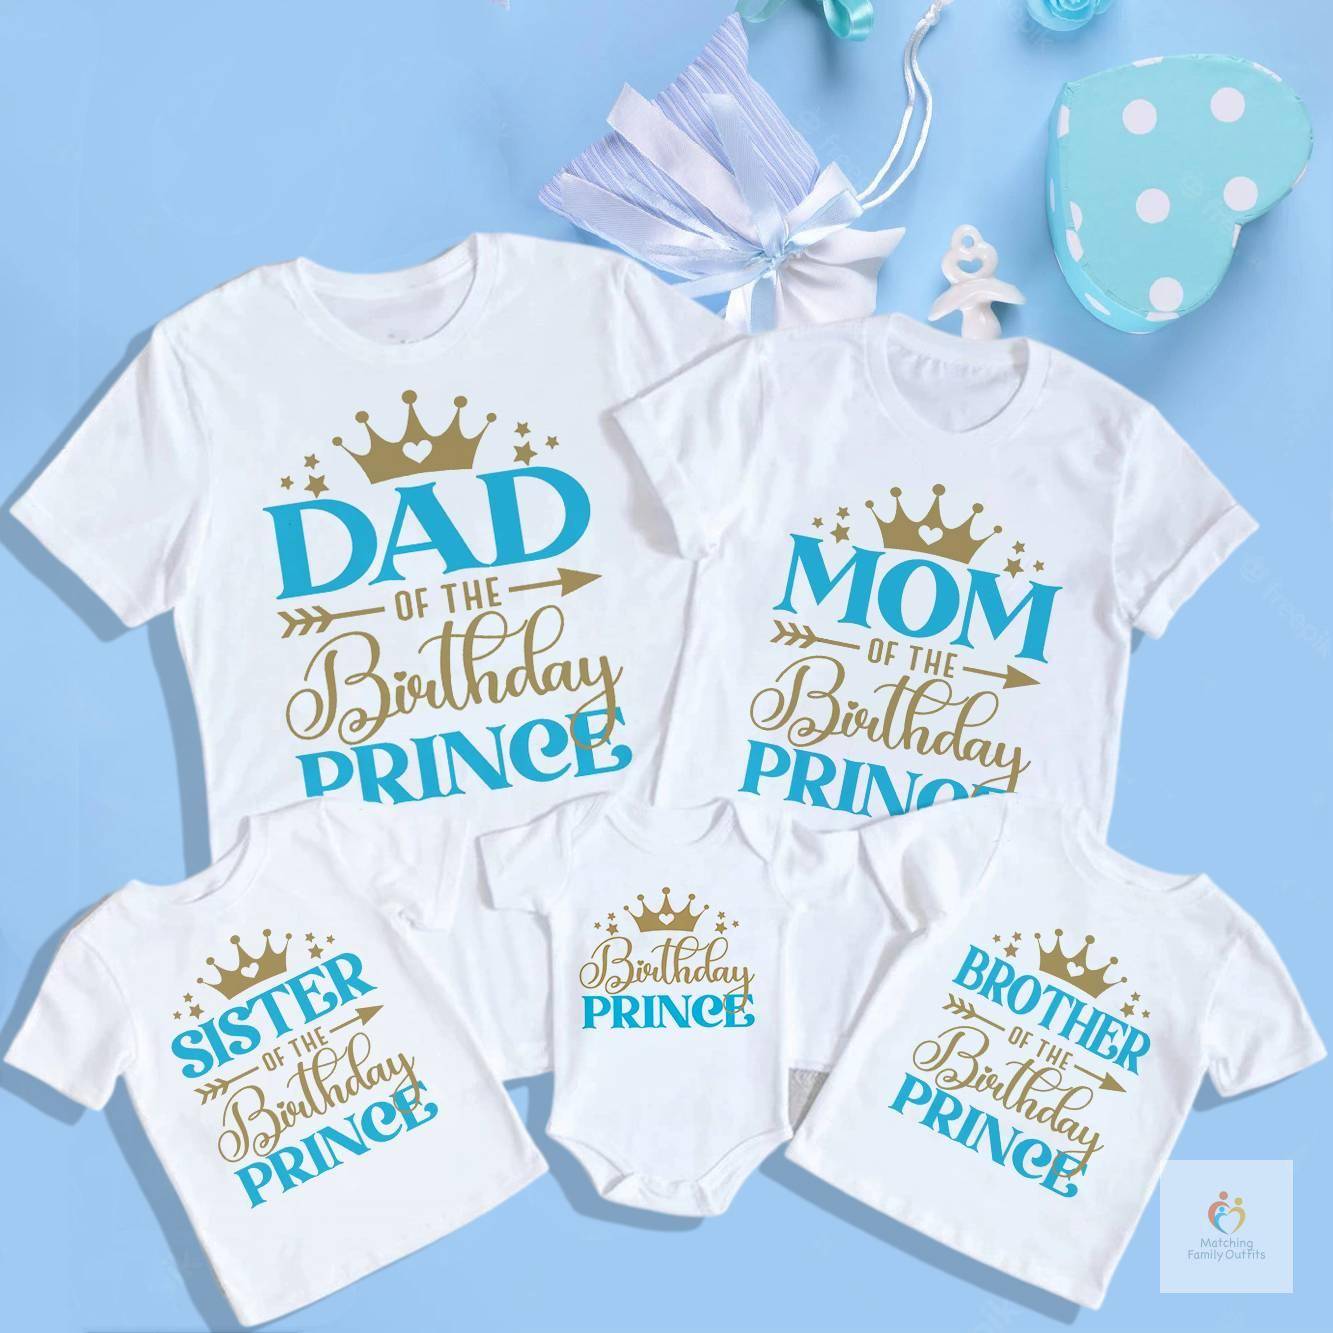 Birthday Prince Family Matching Clothes Mother Father Kids T Shirts Tops Baby Bodysuit Boys Birthday Party Look Outfits